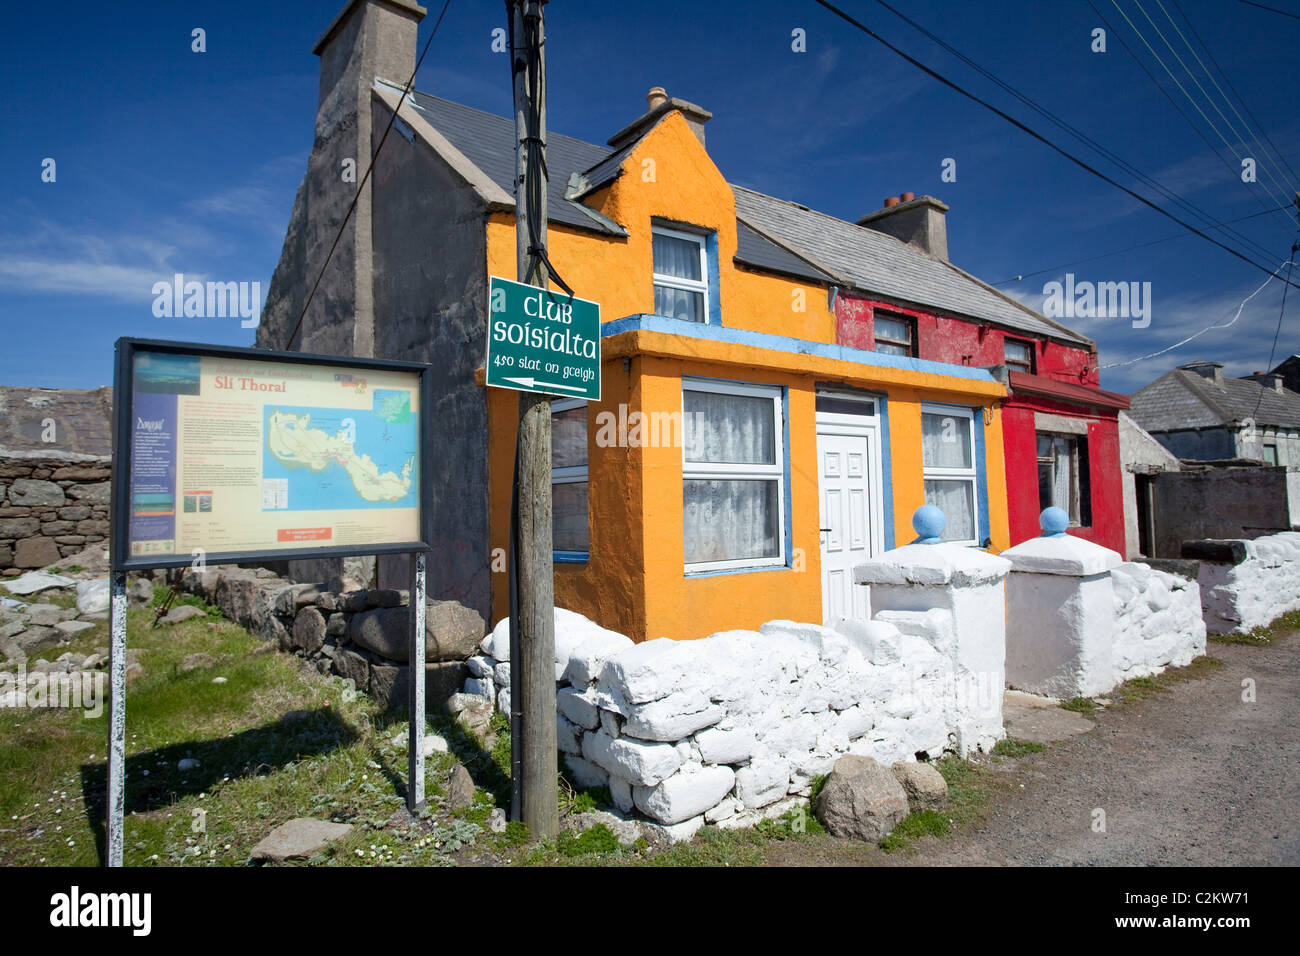 Cottage colorati in West Town, Tory Island, County Donegal, Irlanda. Foto Stock